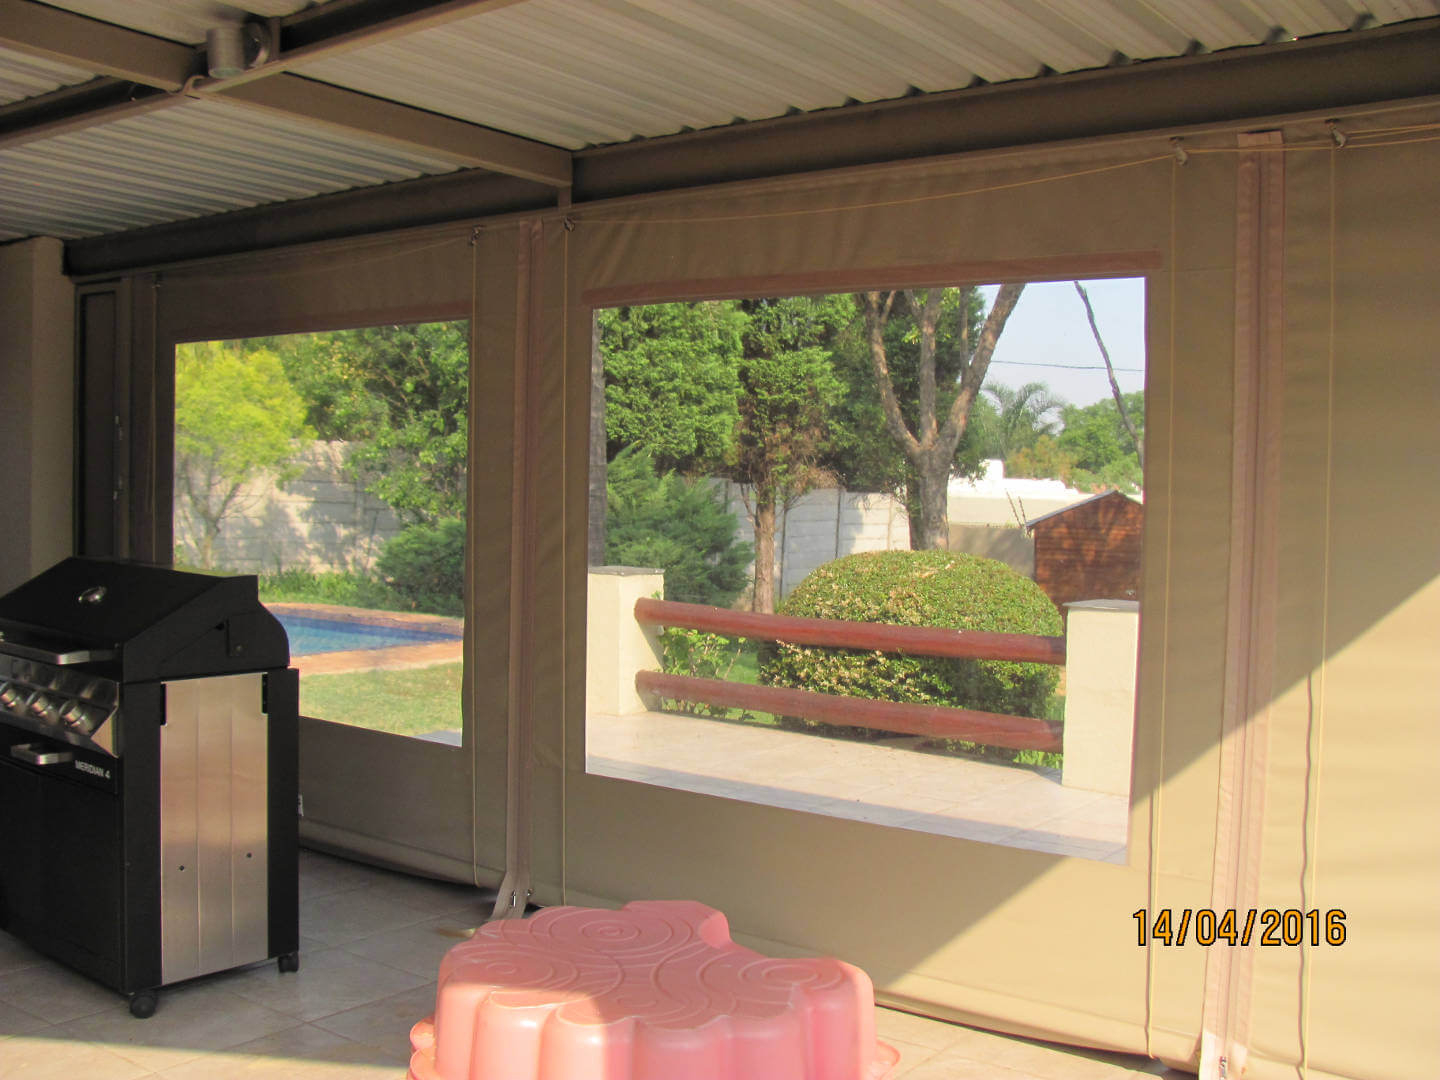 Duramaster Outdoor Duramaster Outdoor Blinds with regard to dimensions 1440 X 1080